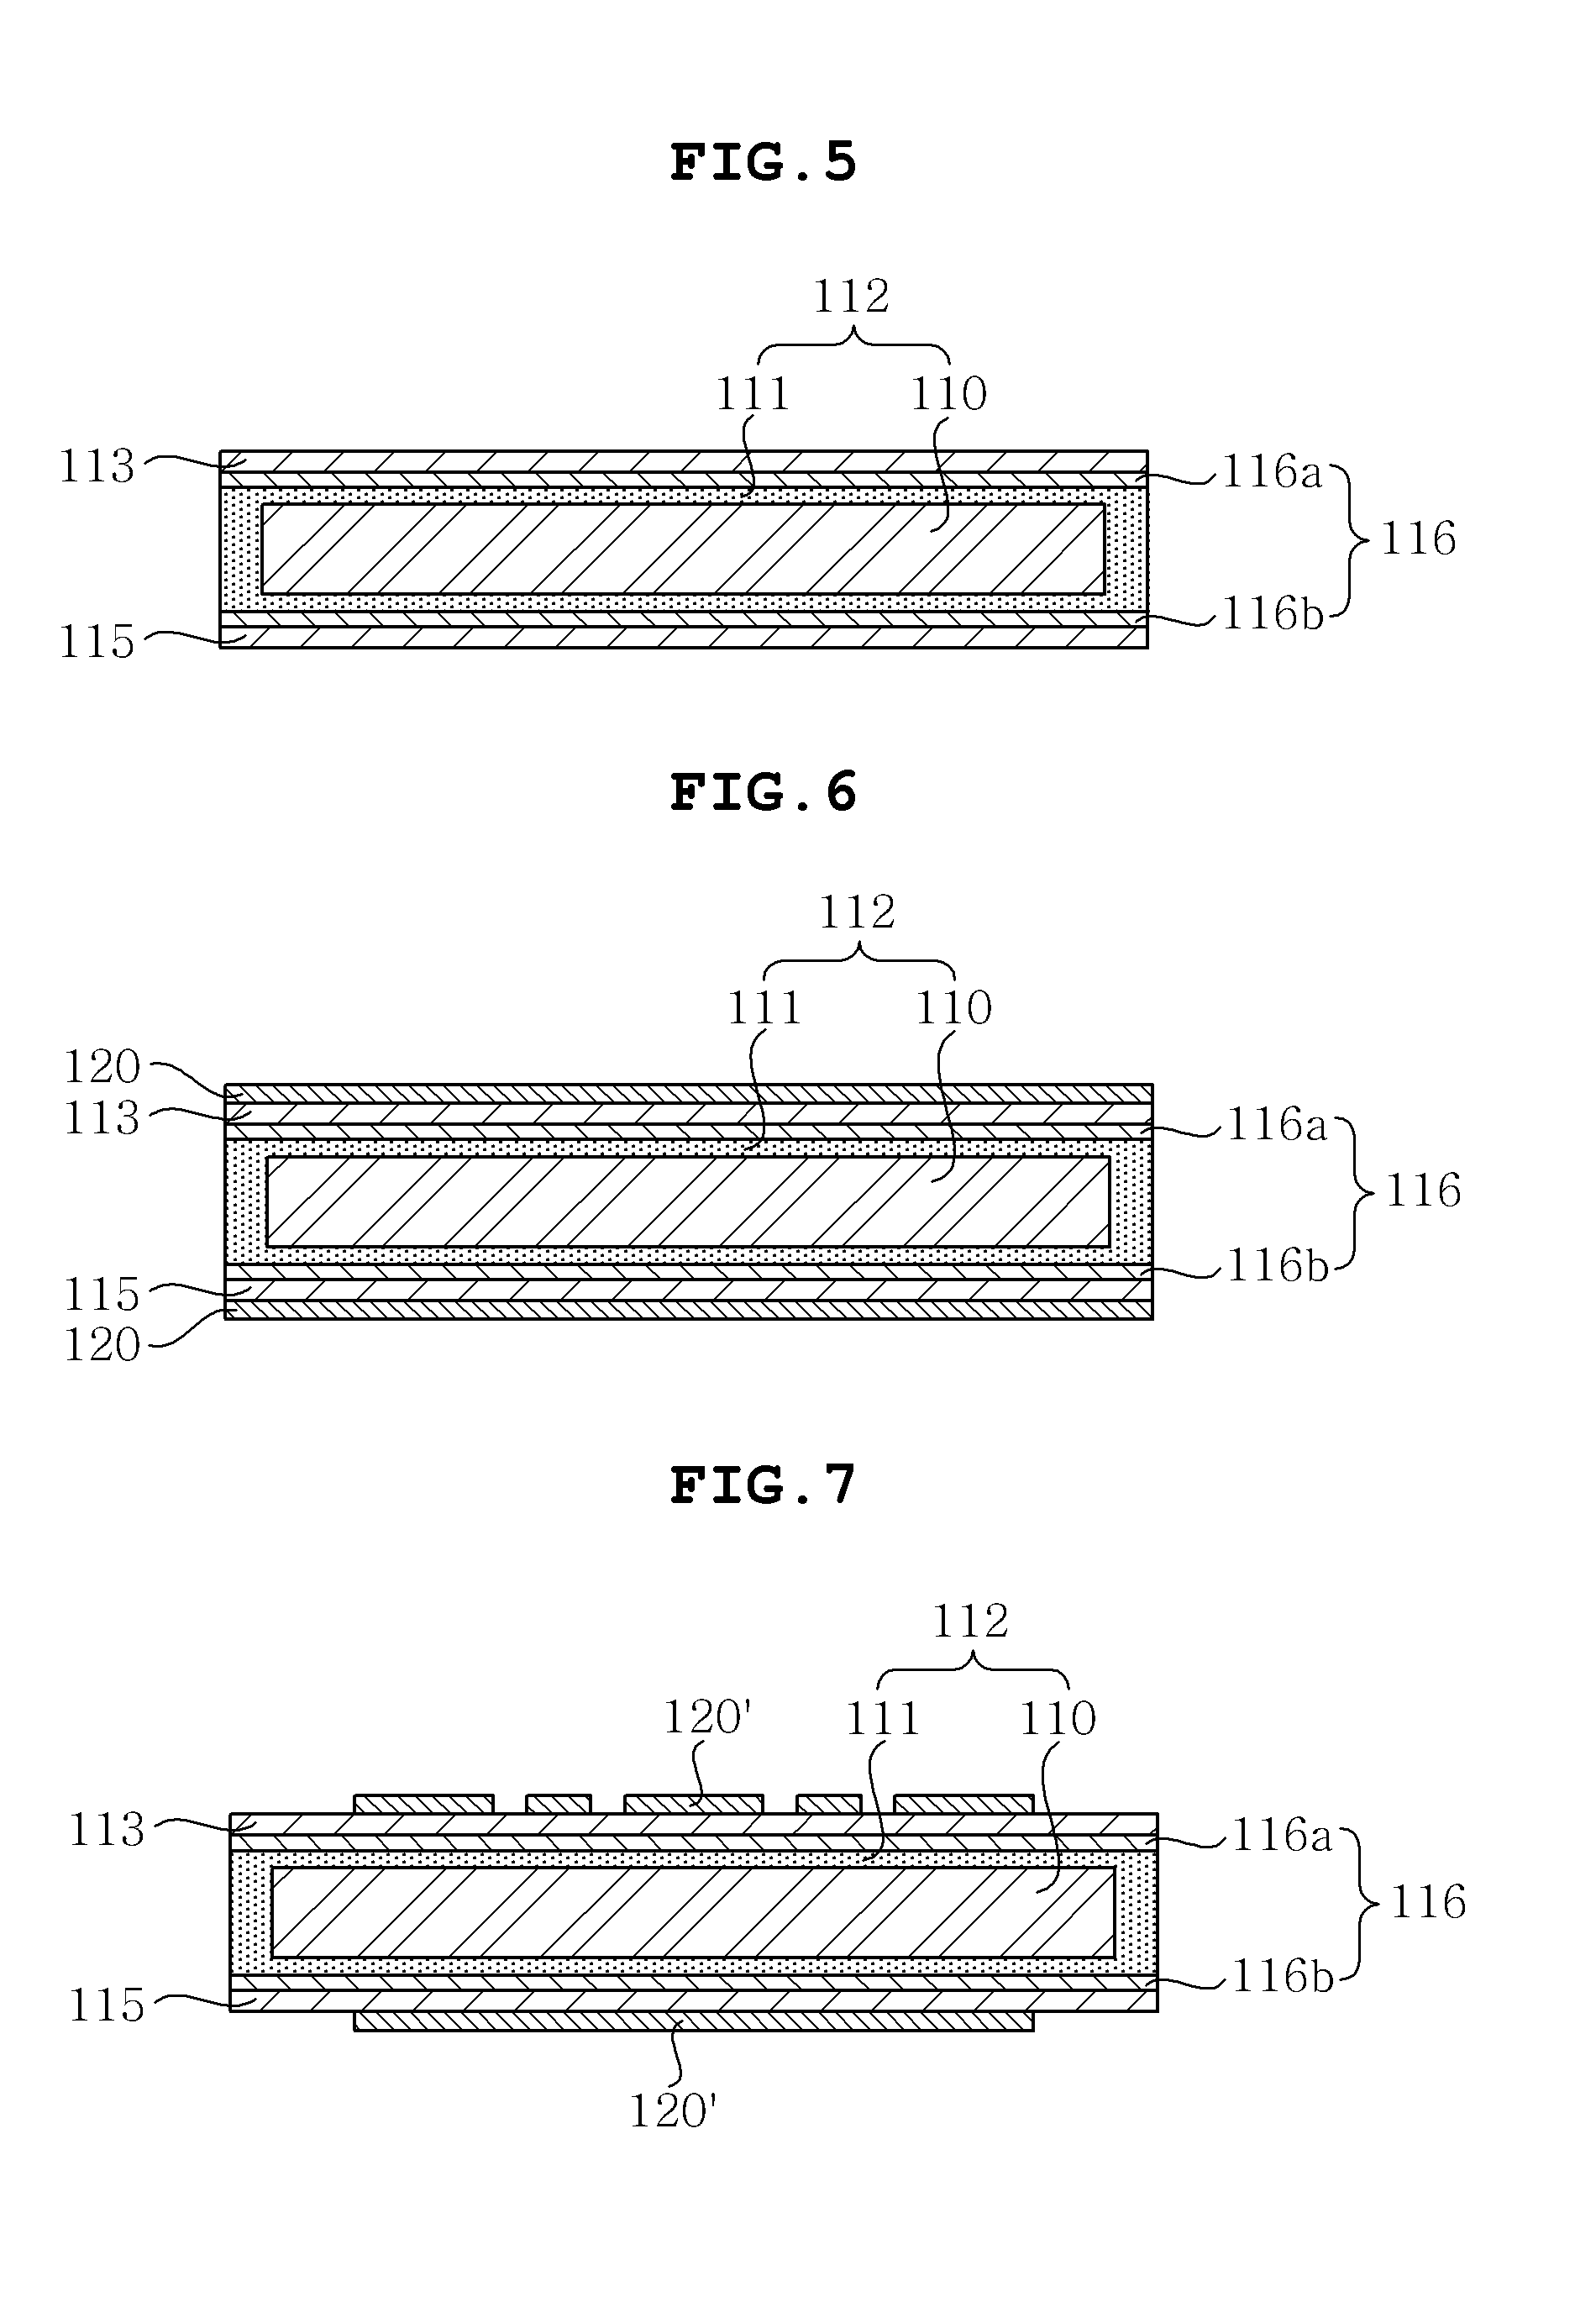 Heat-radiating substrate and method for manufacturing the same